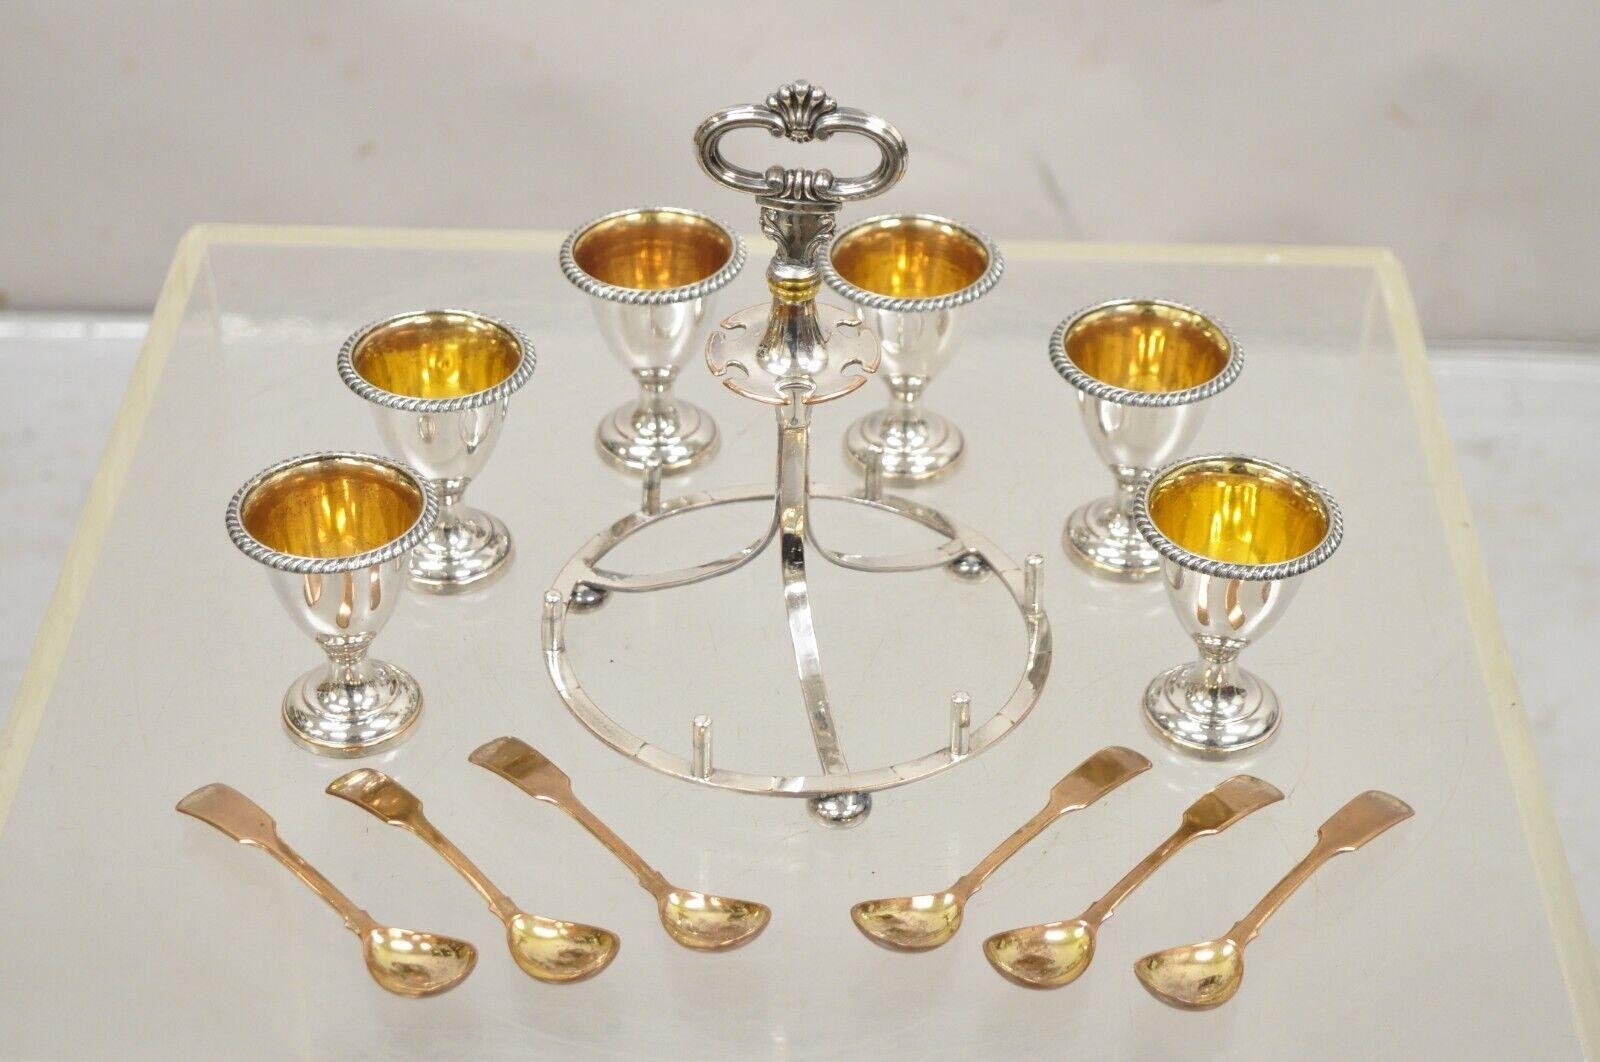 Antique Victorian Silver Plated Egg Server with Spoon Set - Serving for 6 In Good Condition For Sale In Philadelphia, PA